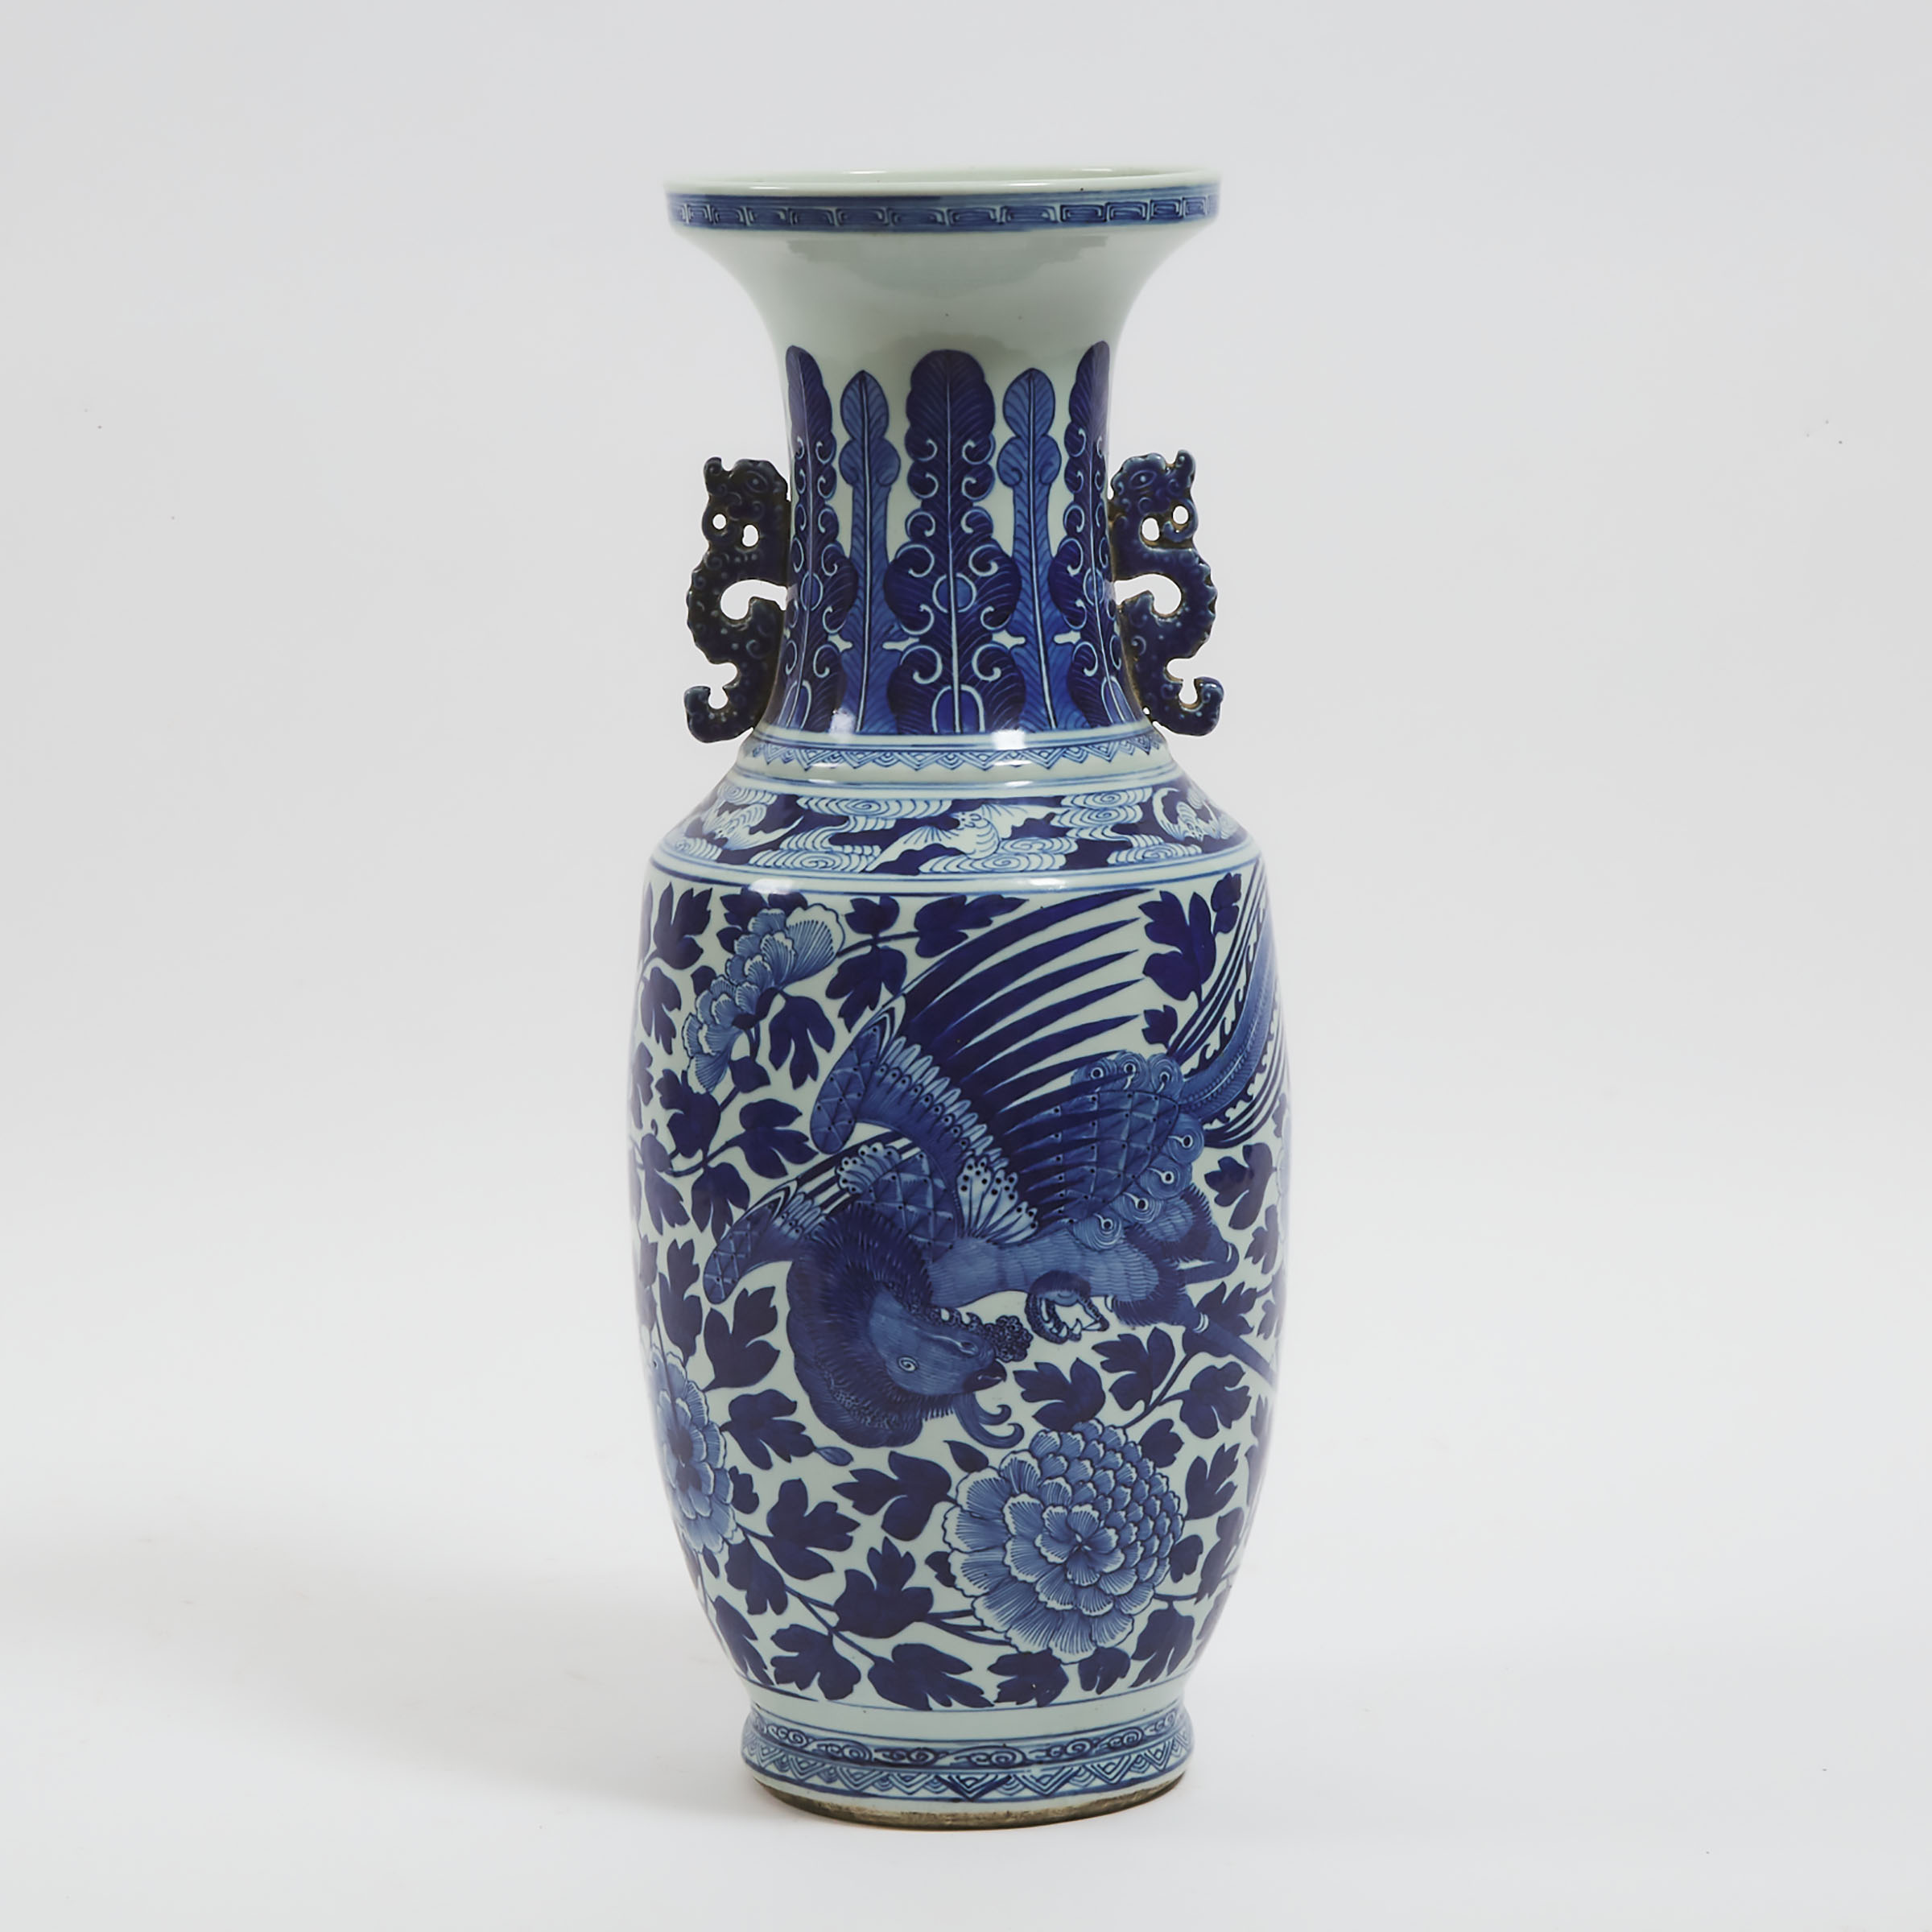 A Blue and White 'Phoenix' Vase, Early 20th Century